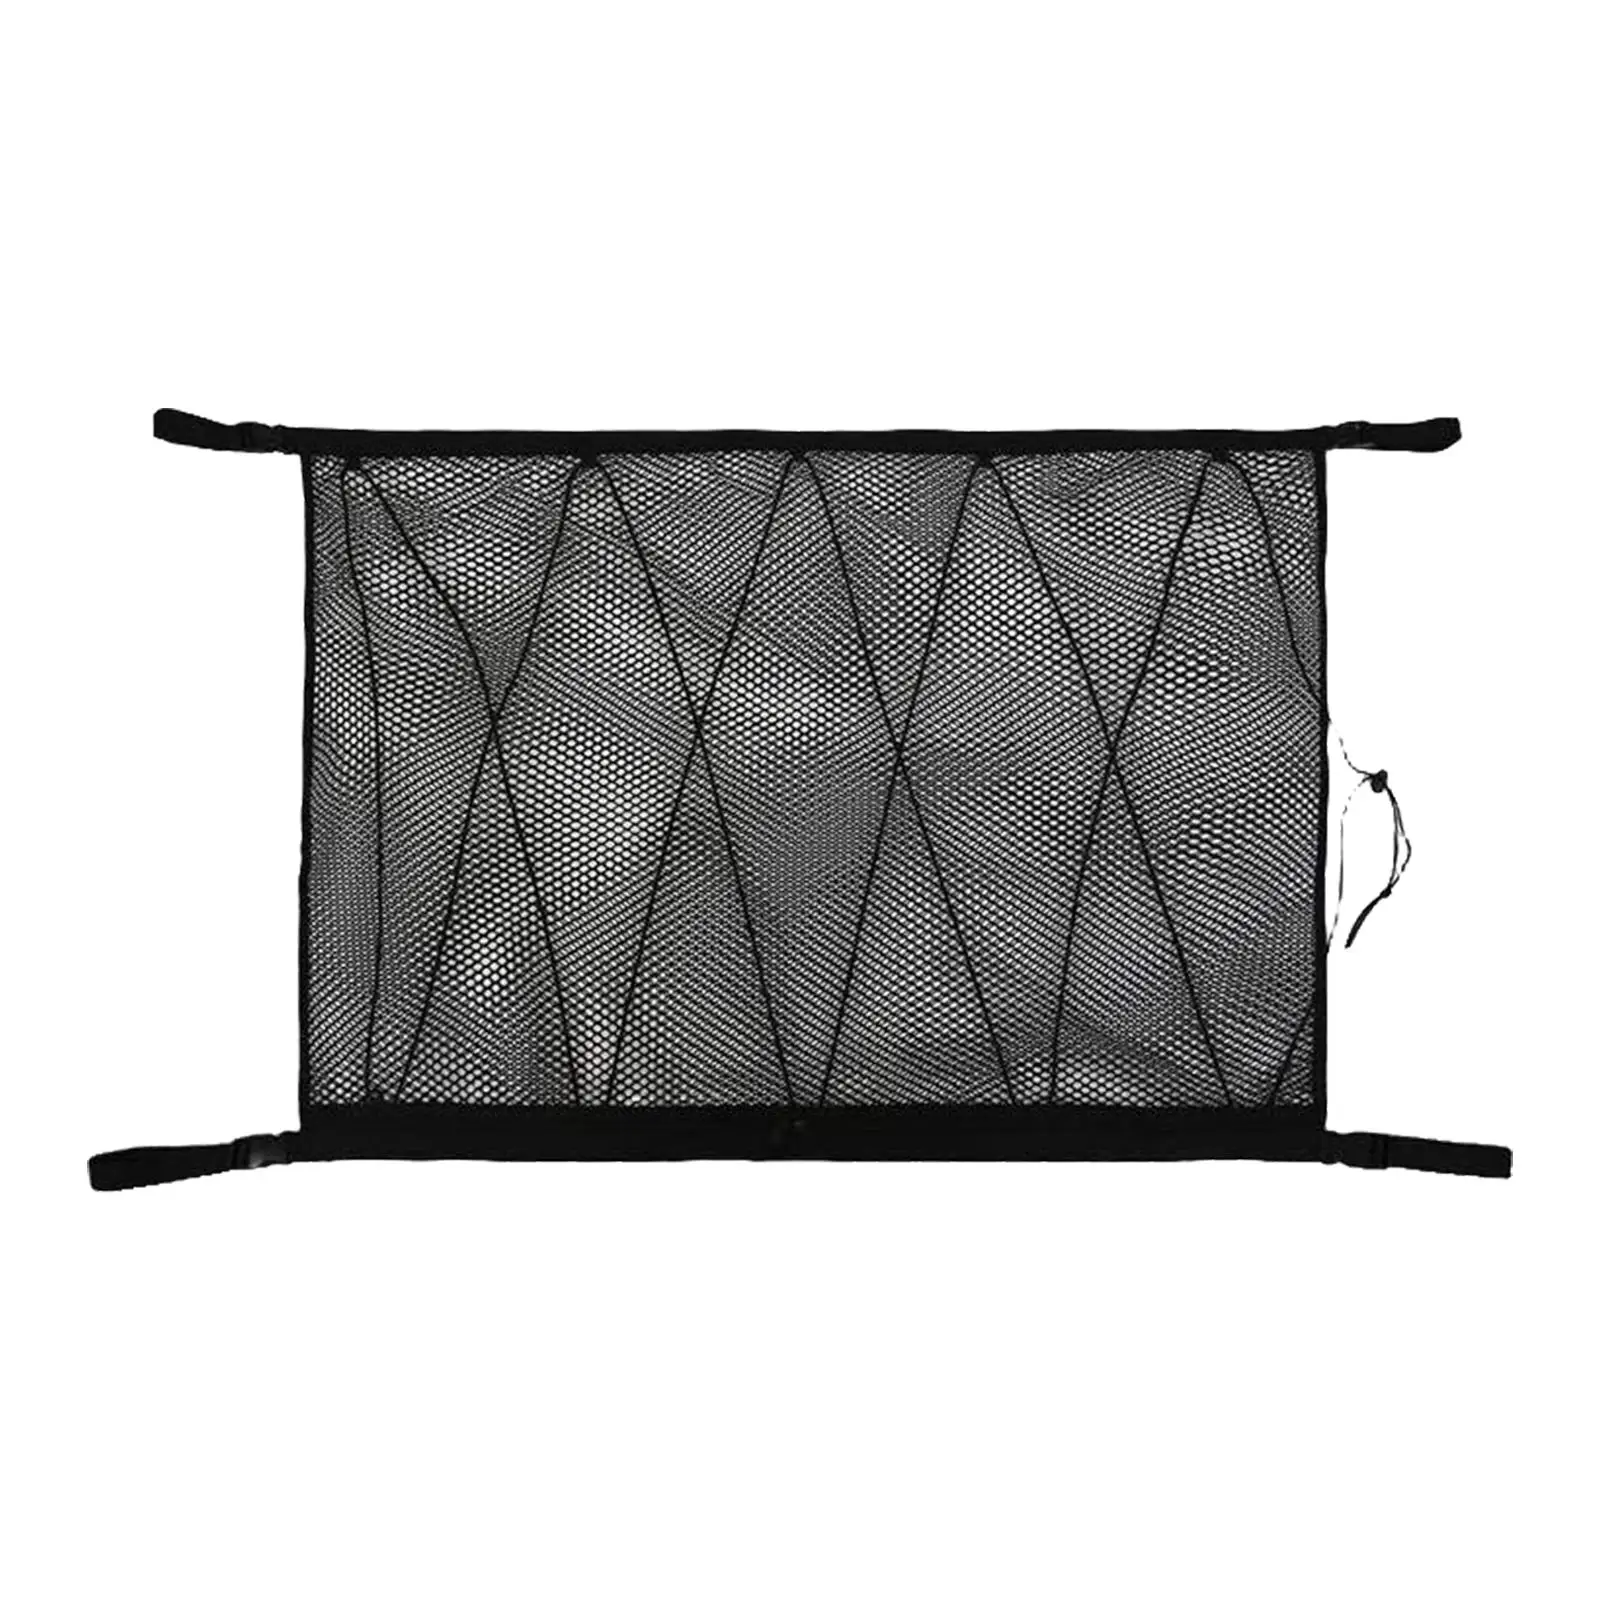 Car Ceiling Cargo Pocket with Zipper Adjustable for Quilt Camping